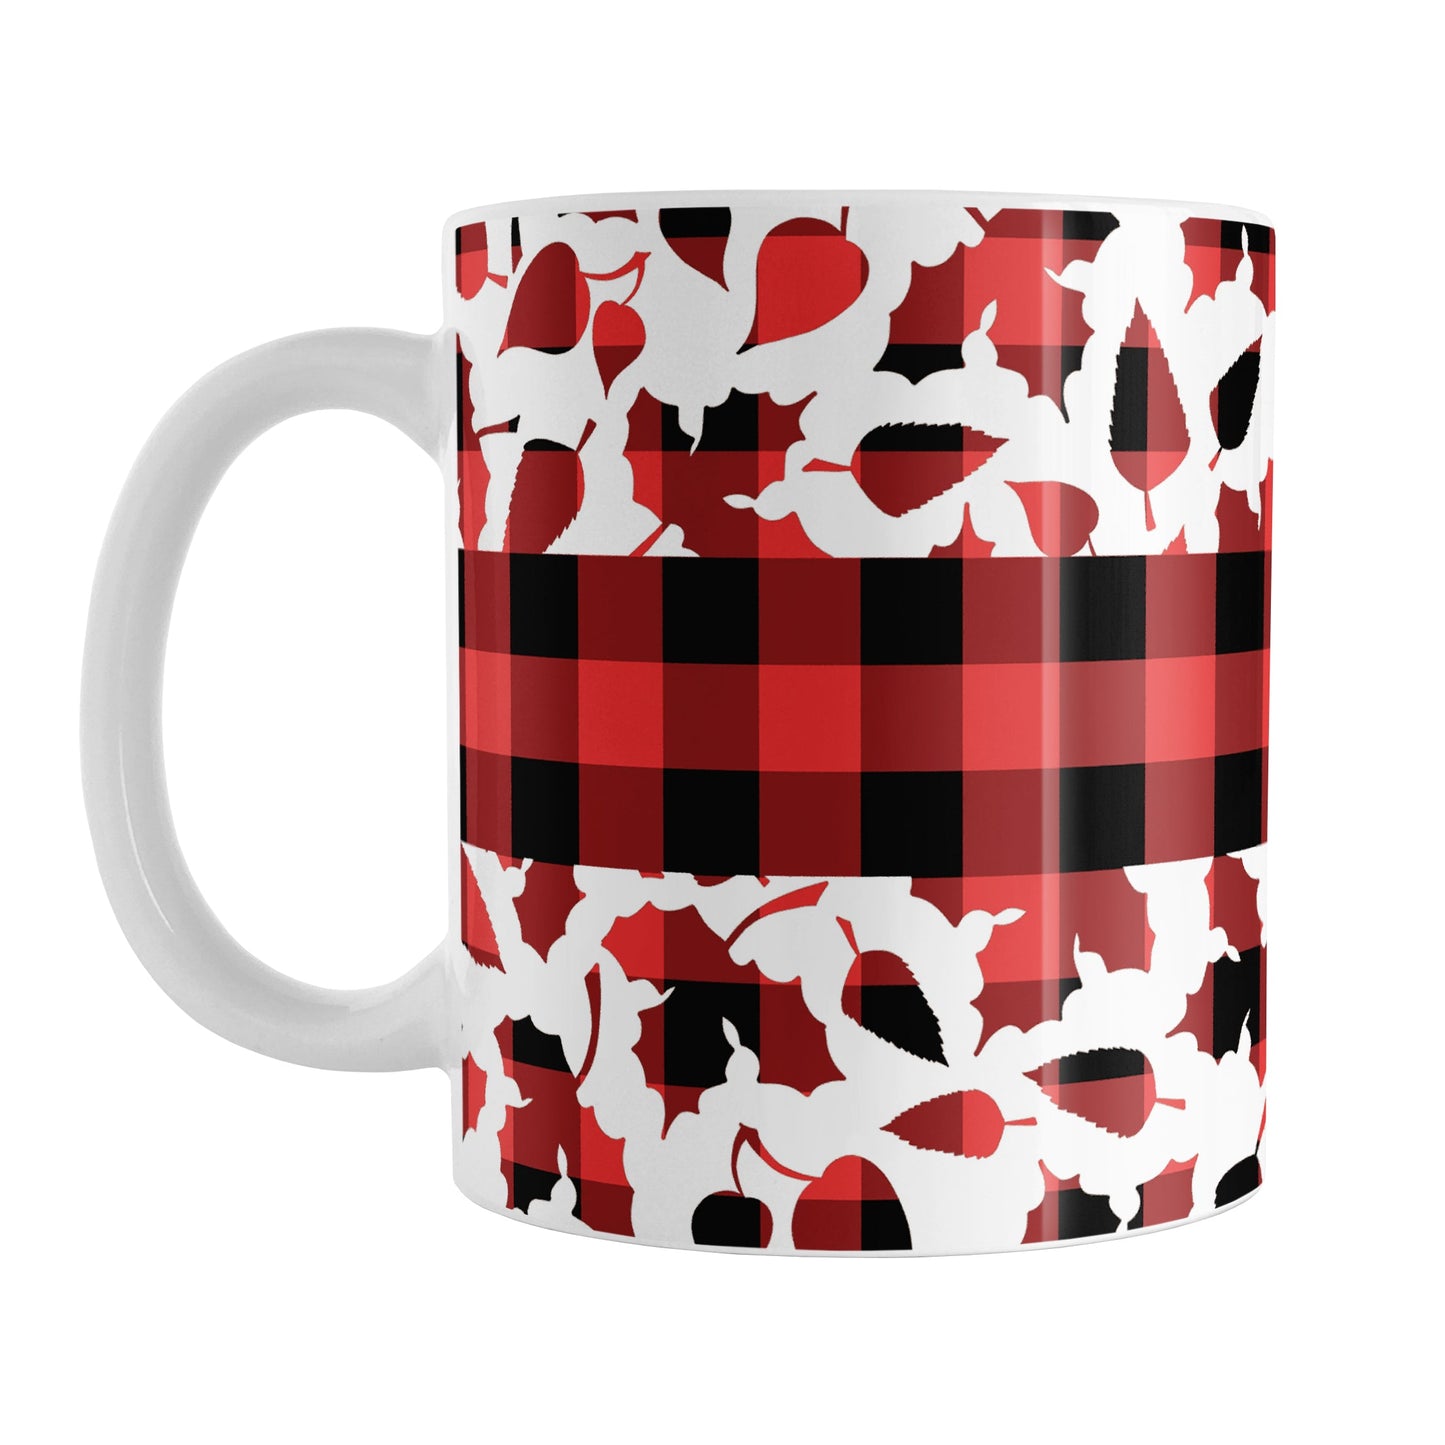 Buffalo Plaid Leaves Fall Mug (11oz) at Amy's Coffee Mugs. A ceramic coffee mug designed with a pattern of leaves with a red and black buffalo plaid pattern and a buffalo plaid stripe across the center over the leaves. This design wraps around the mug to the handle.